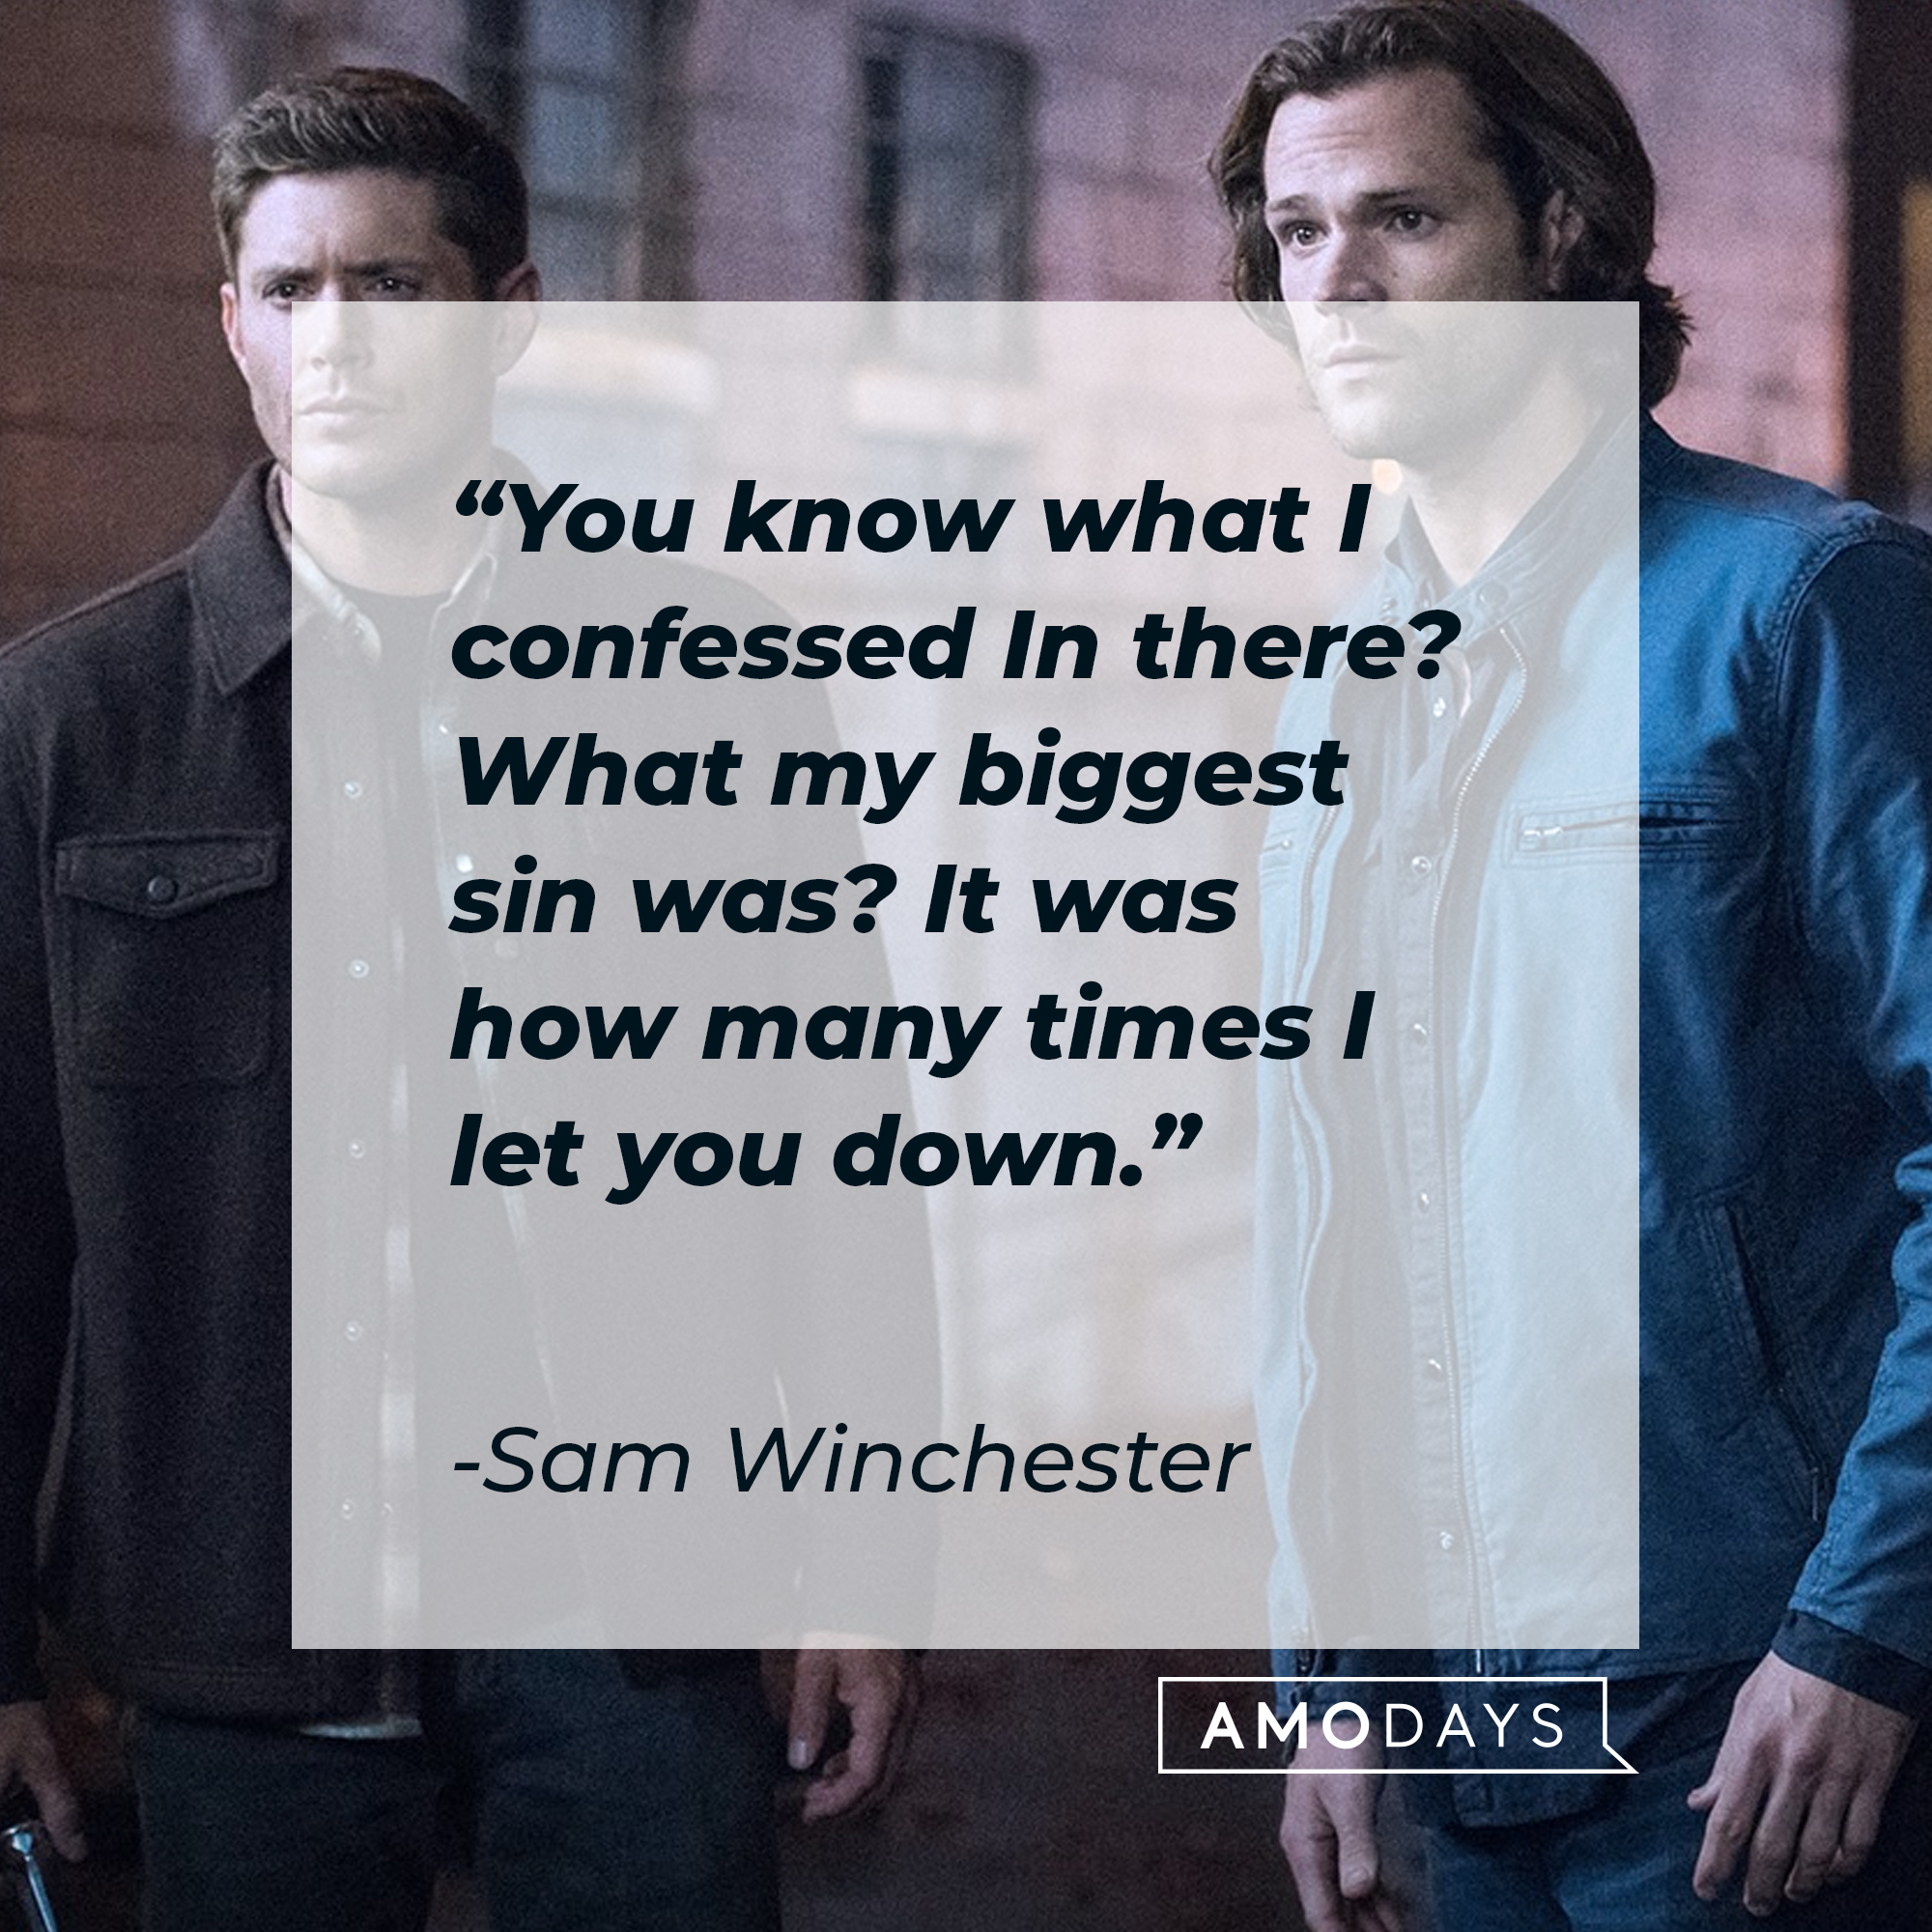 Sam and Dean Winchester, with Sam's quote: "You know what I confessed in there? What my biggest sin was? It was how many times I let you down.” | Source: Facebook.com/Supernatural